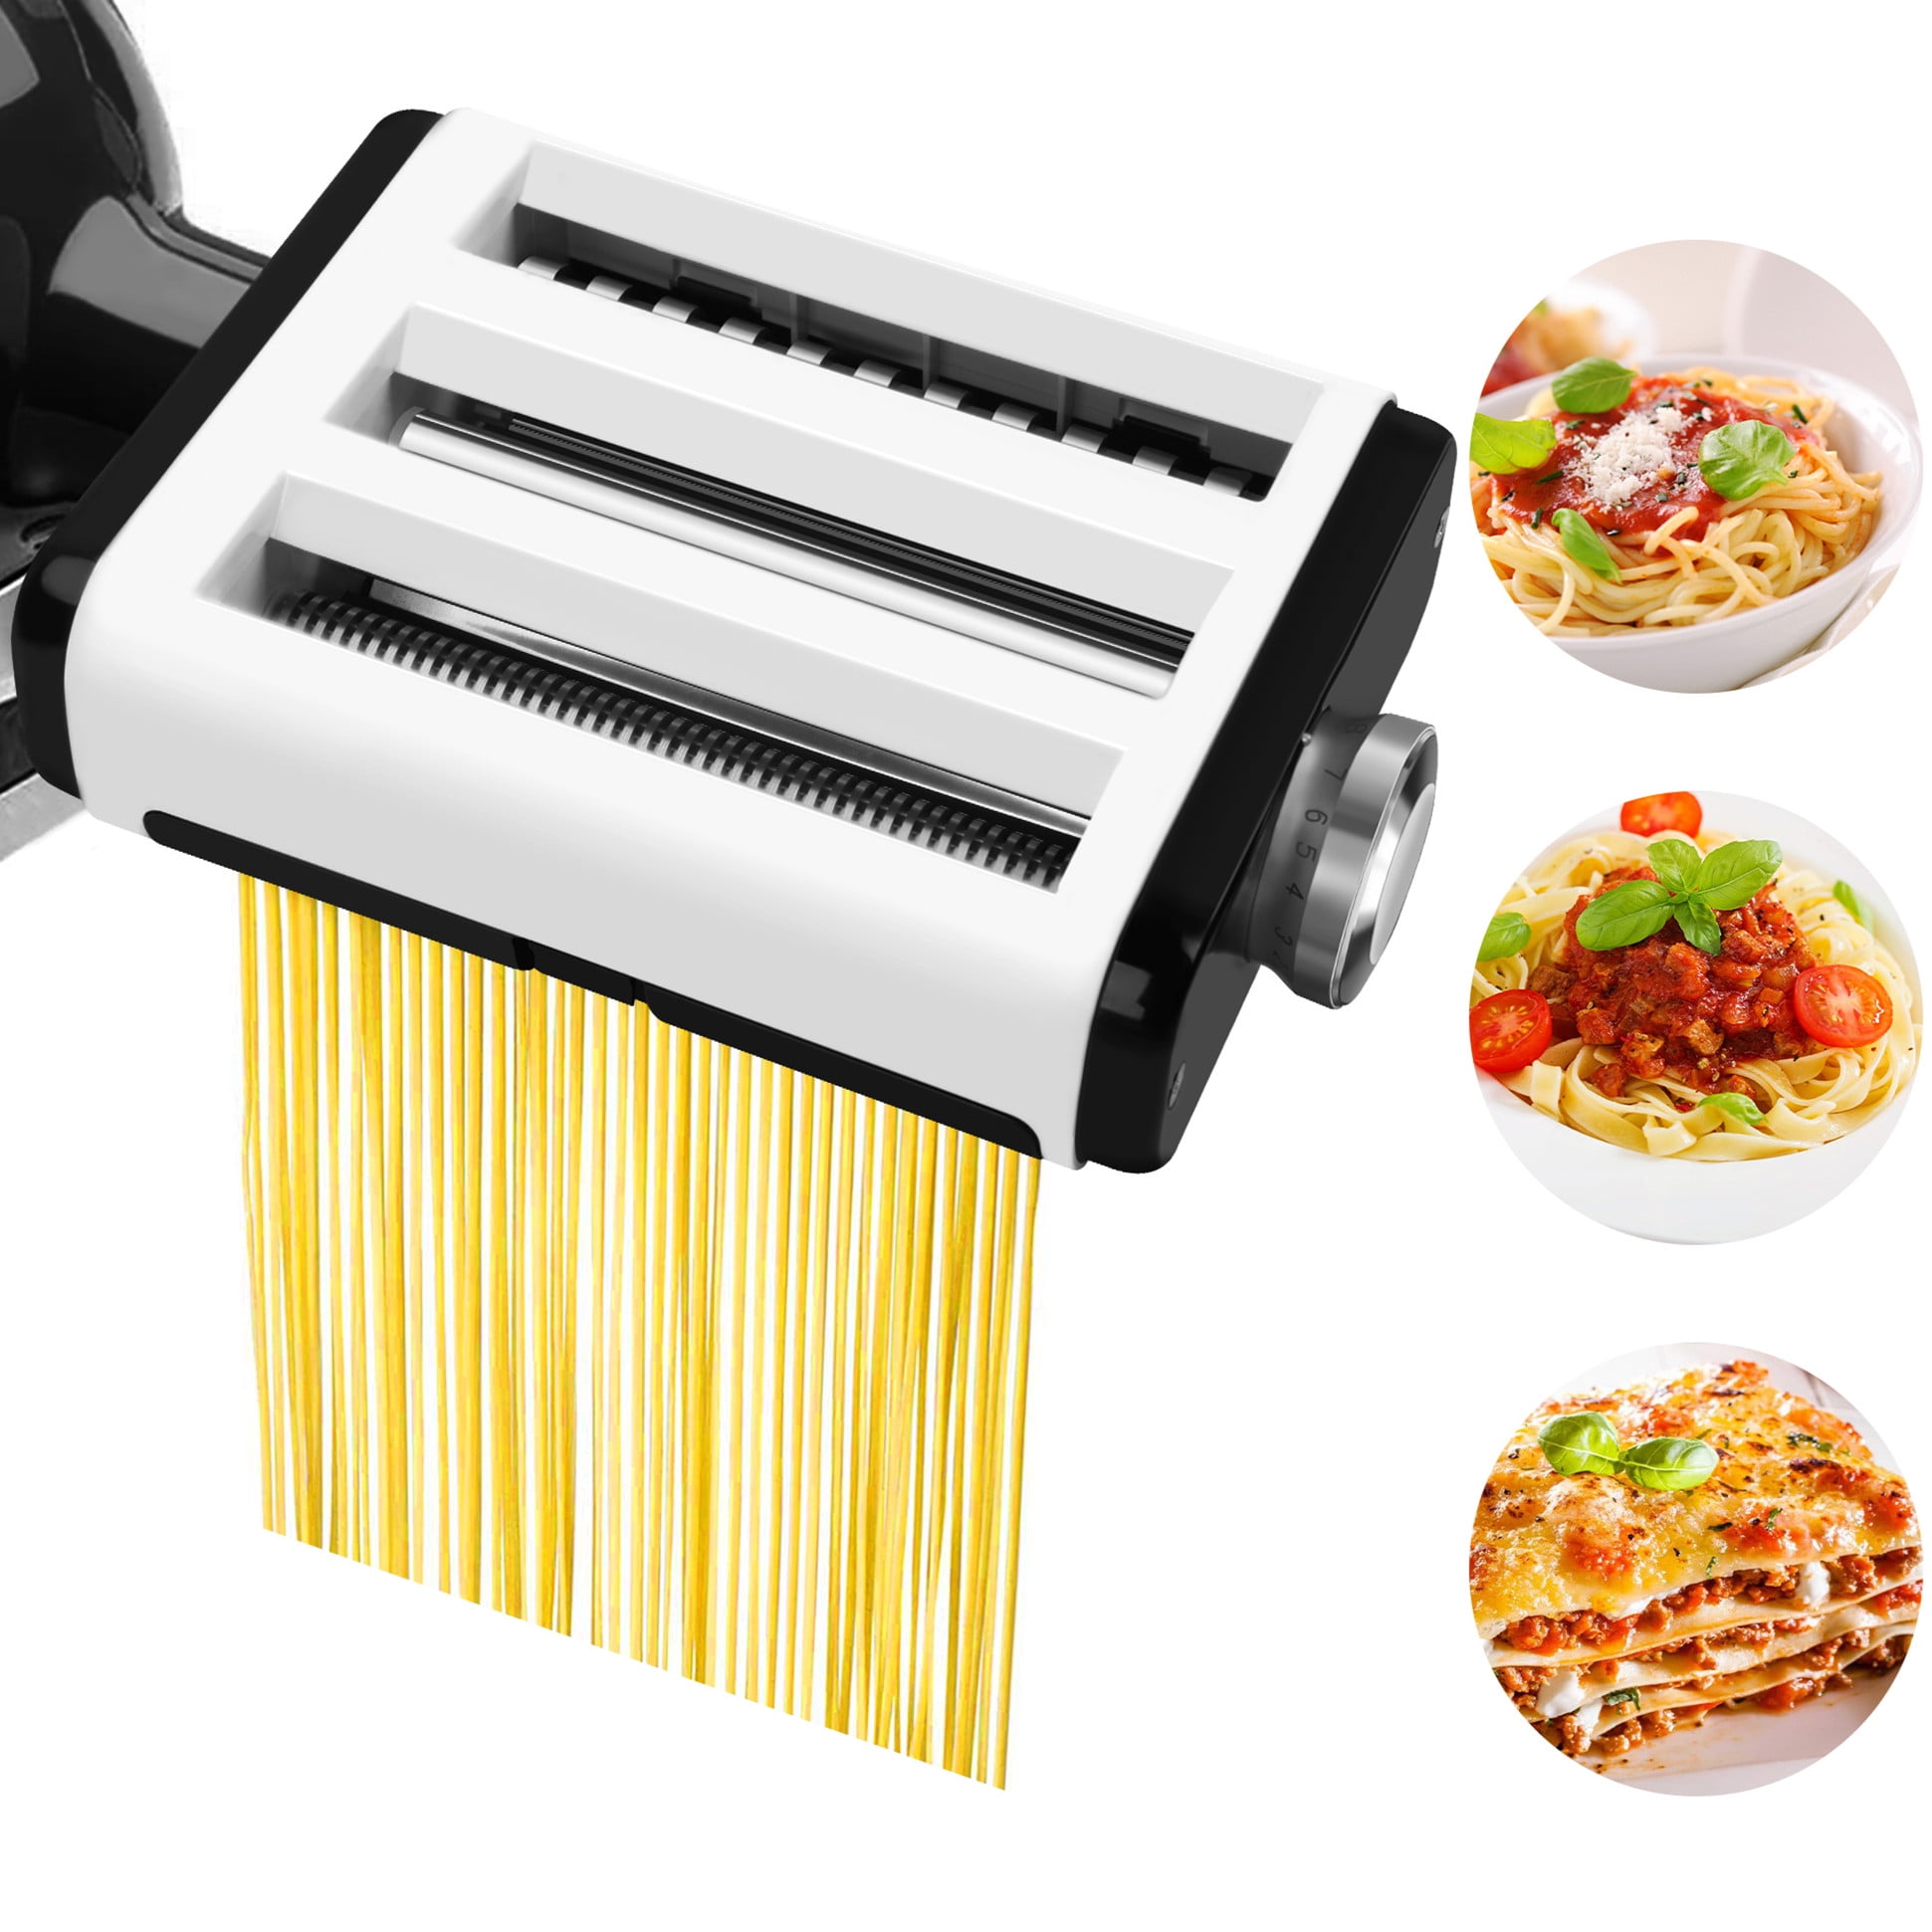 InnoMoon Pasta Attachment for KitchenAid Stand Mixer, 3 Piece Pasta Rollar  & Cutter Set Included Pasta Sheet Roller, Spaghetti and Fettuccine Cutter